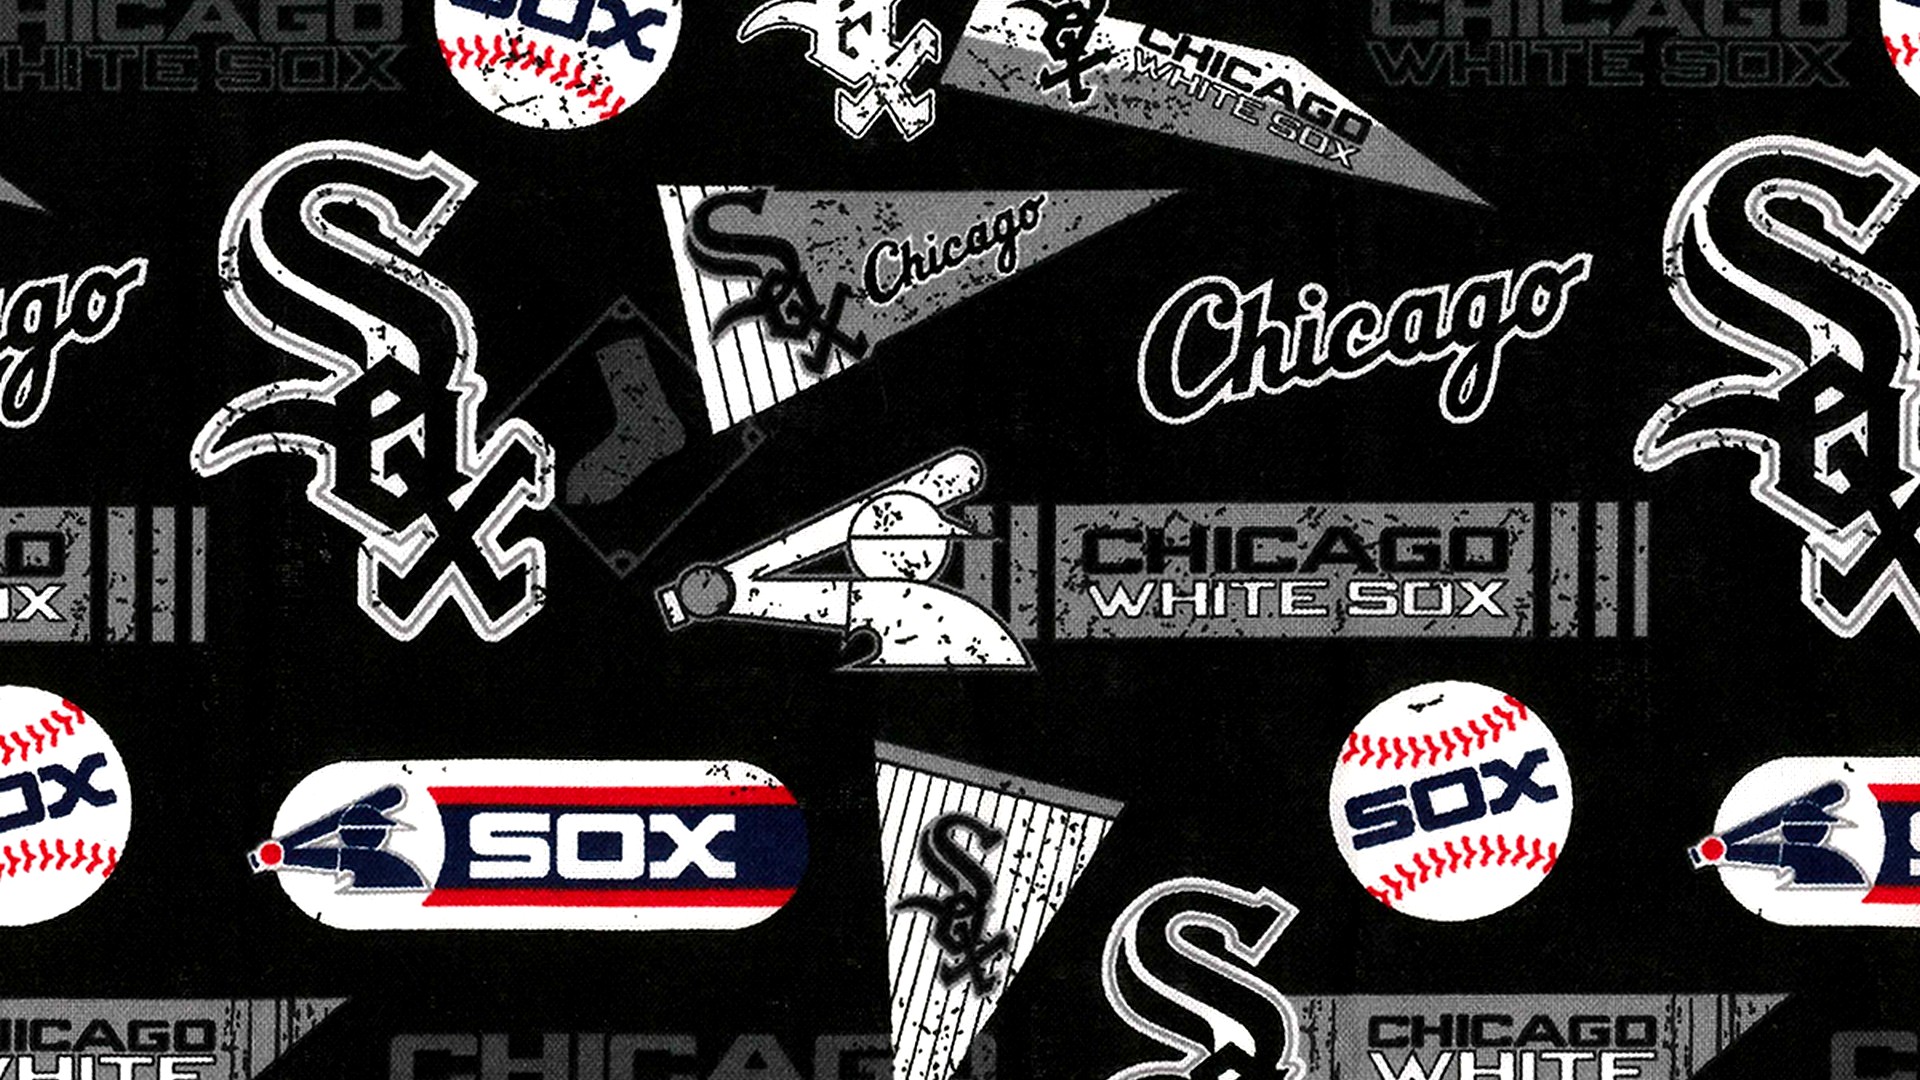 Chicago White Sox Wallpaper HD With high-resolution 1920X1080 pixel. You can use this wallpaper for Mac Desktop Wallpaper, Laptop Screensavers, Android Wallpapers, Tablet or iPhone Home Screen and another mobile phone device